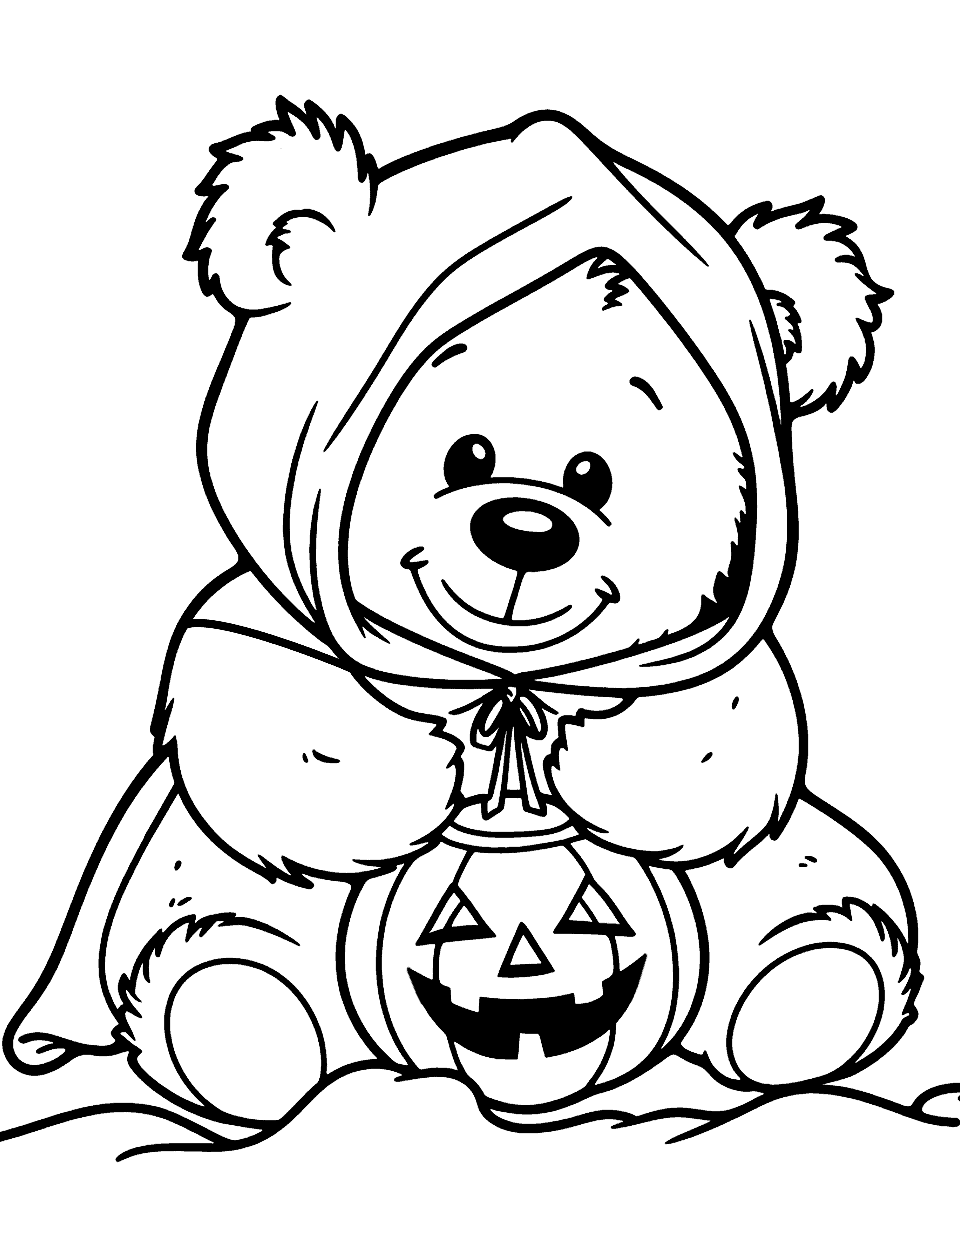 Halloween Teddy Bear Costume Coloring Page - A teddy bear dressed in a Halloween costume.